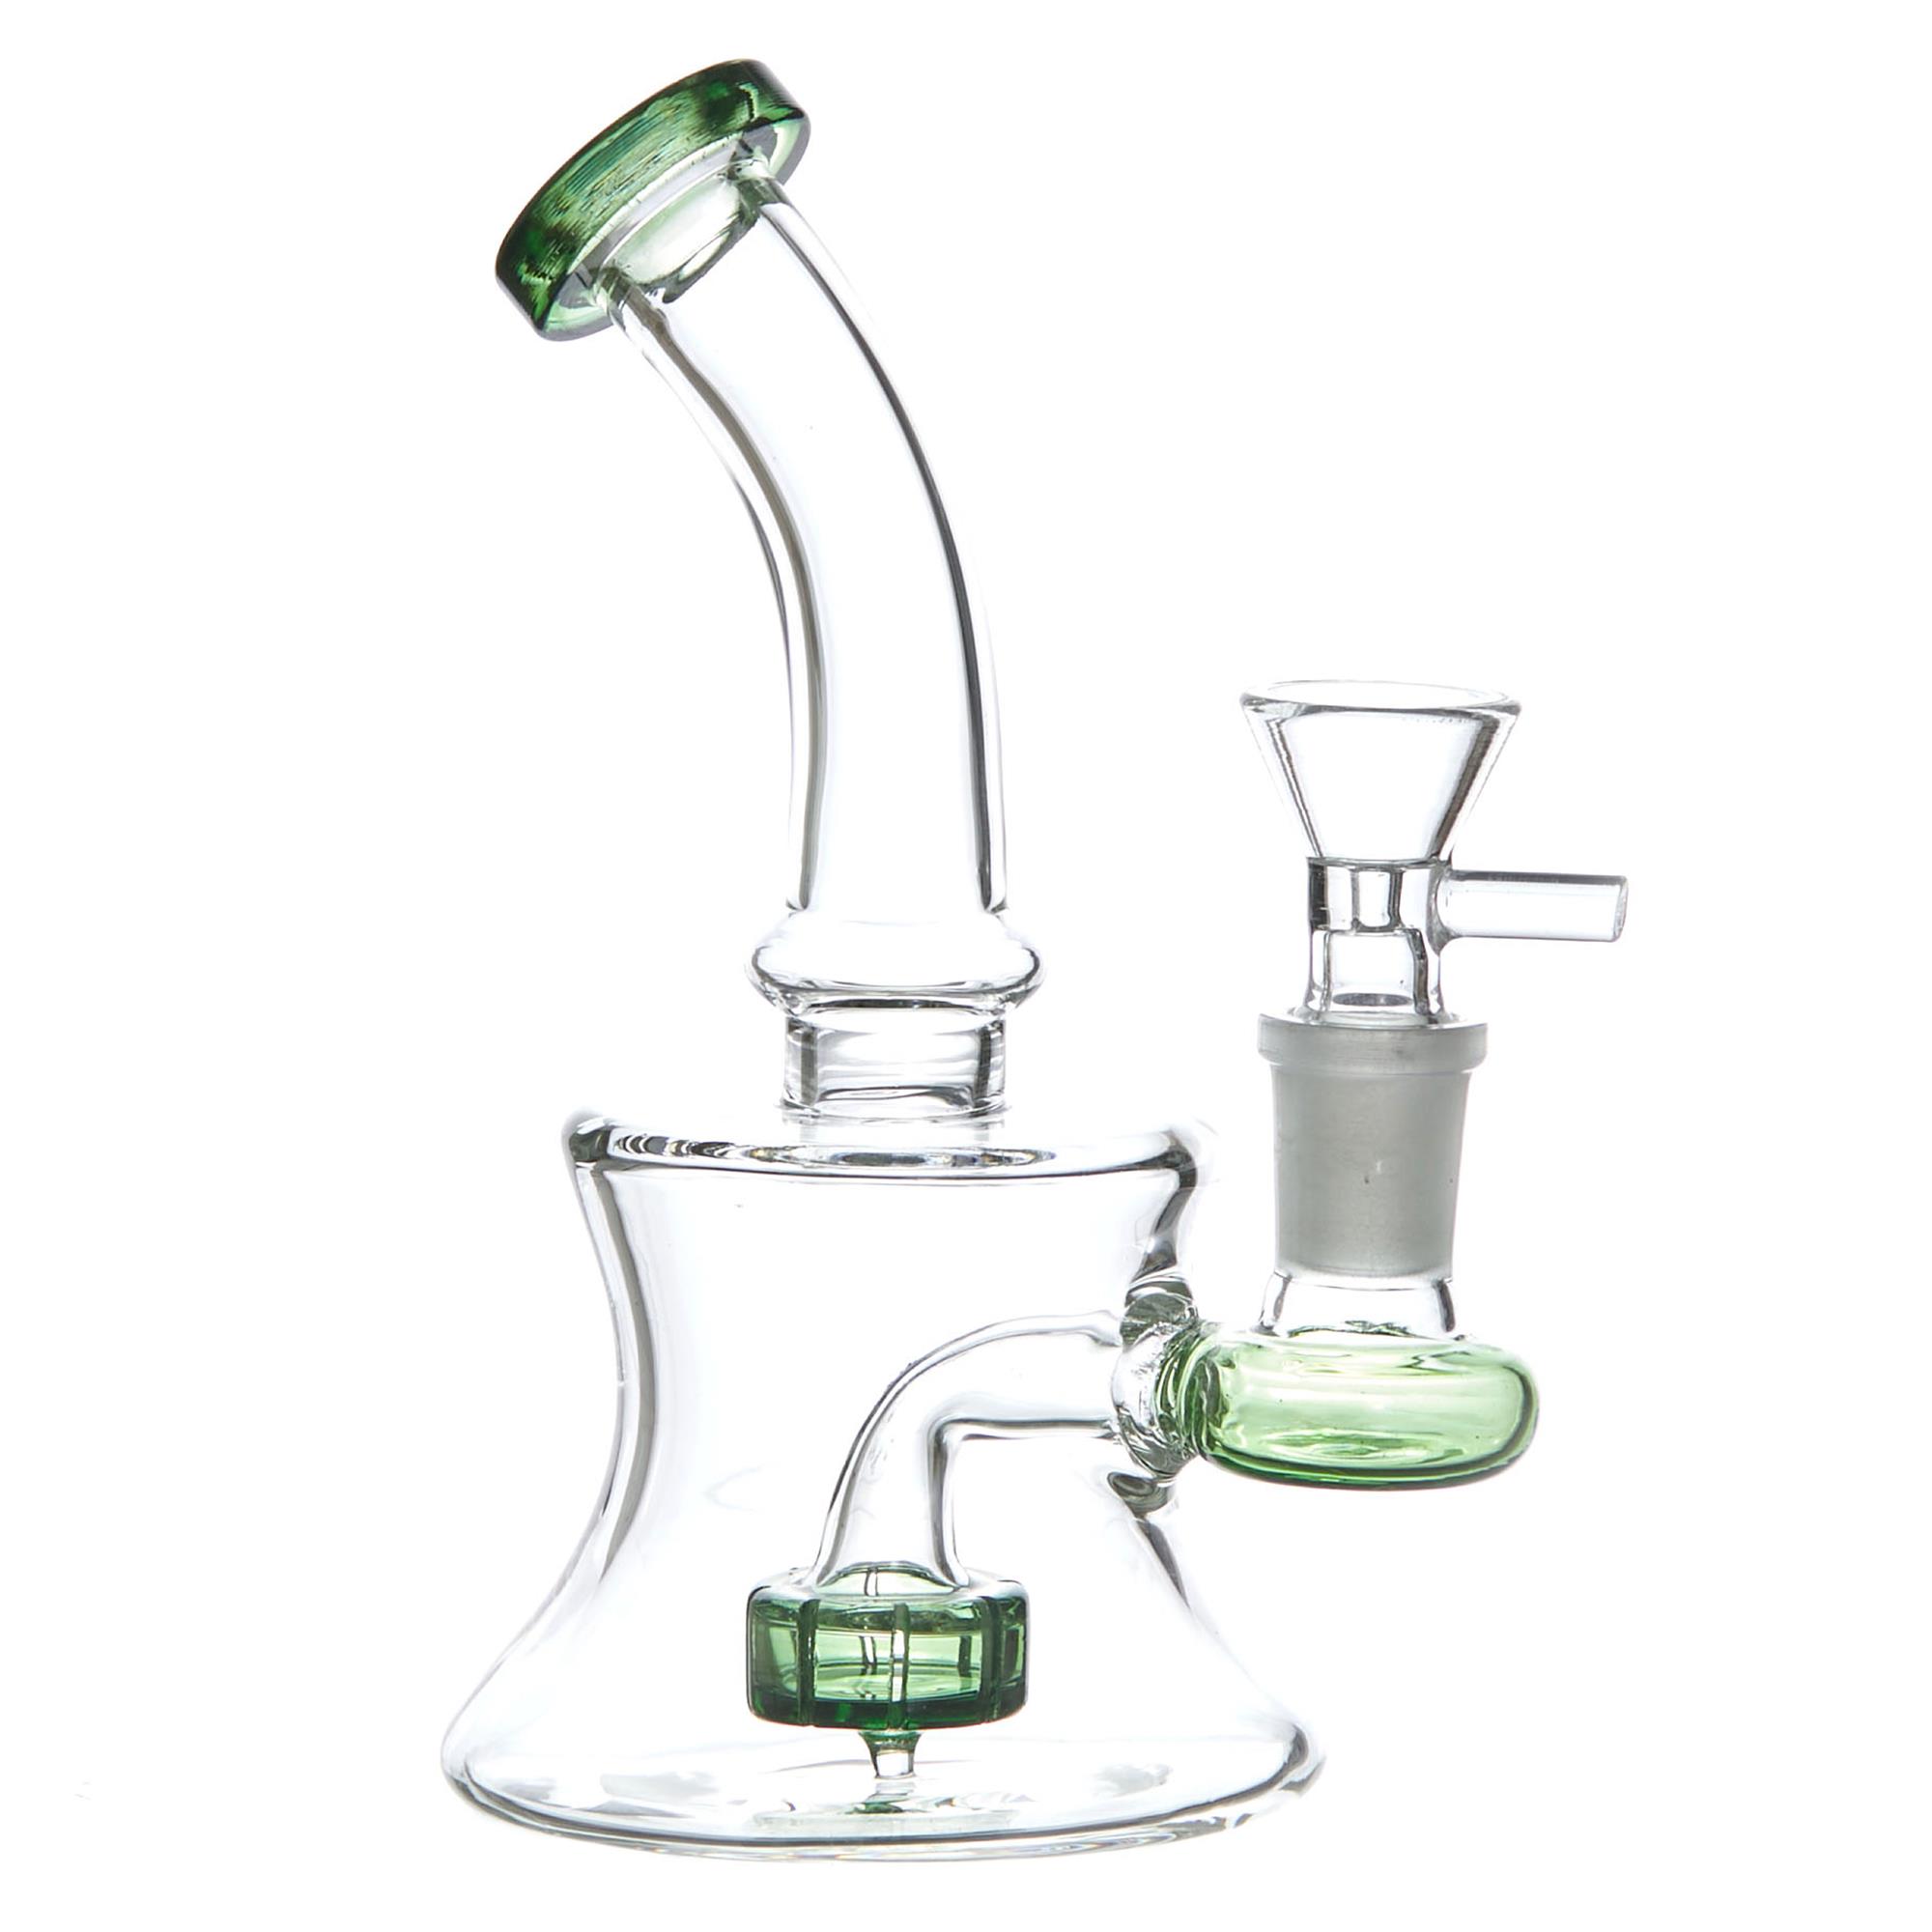 DAYS OF OUR LIVES GLASS BONG